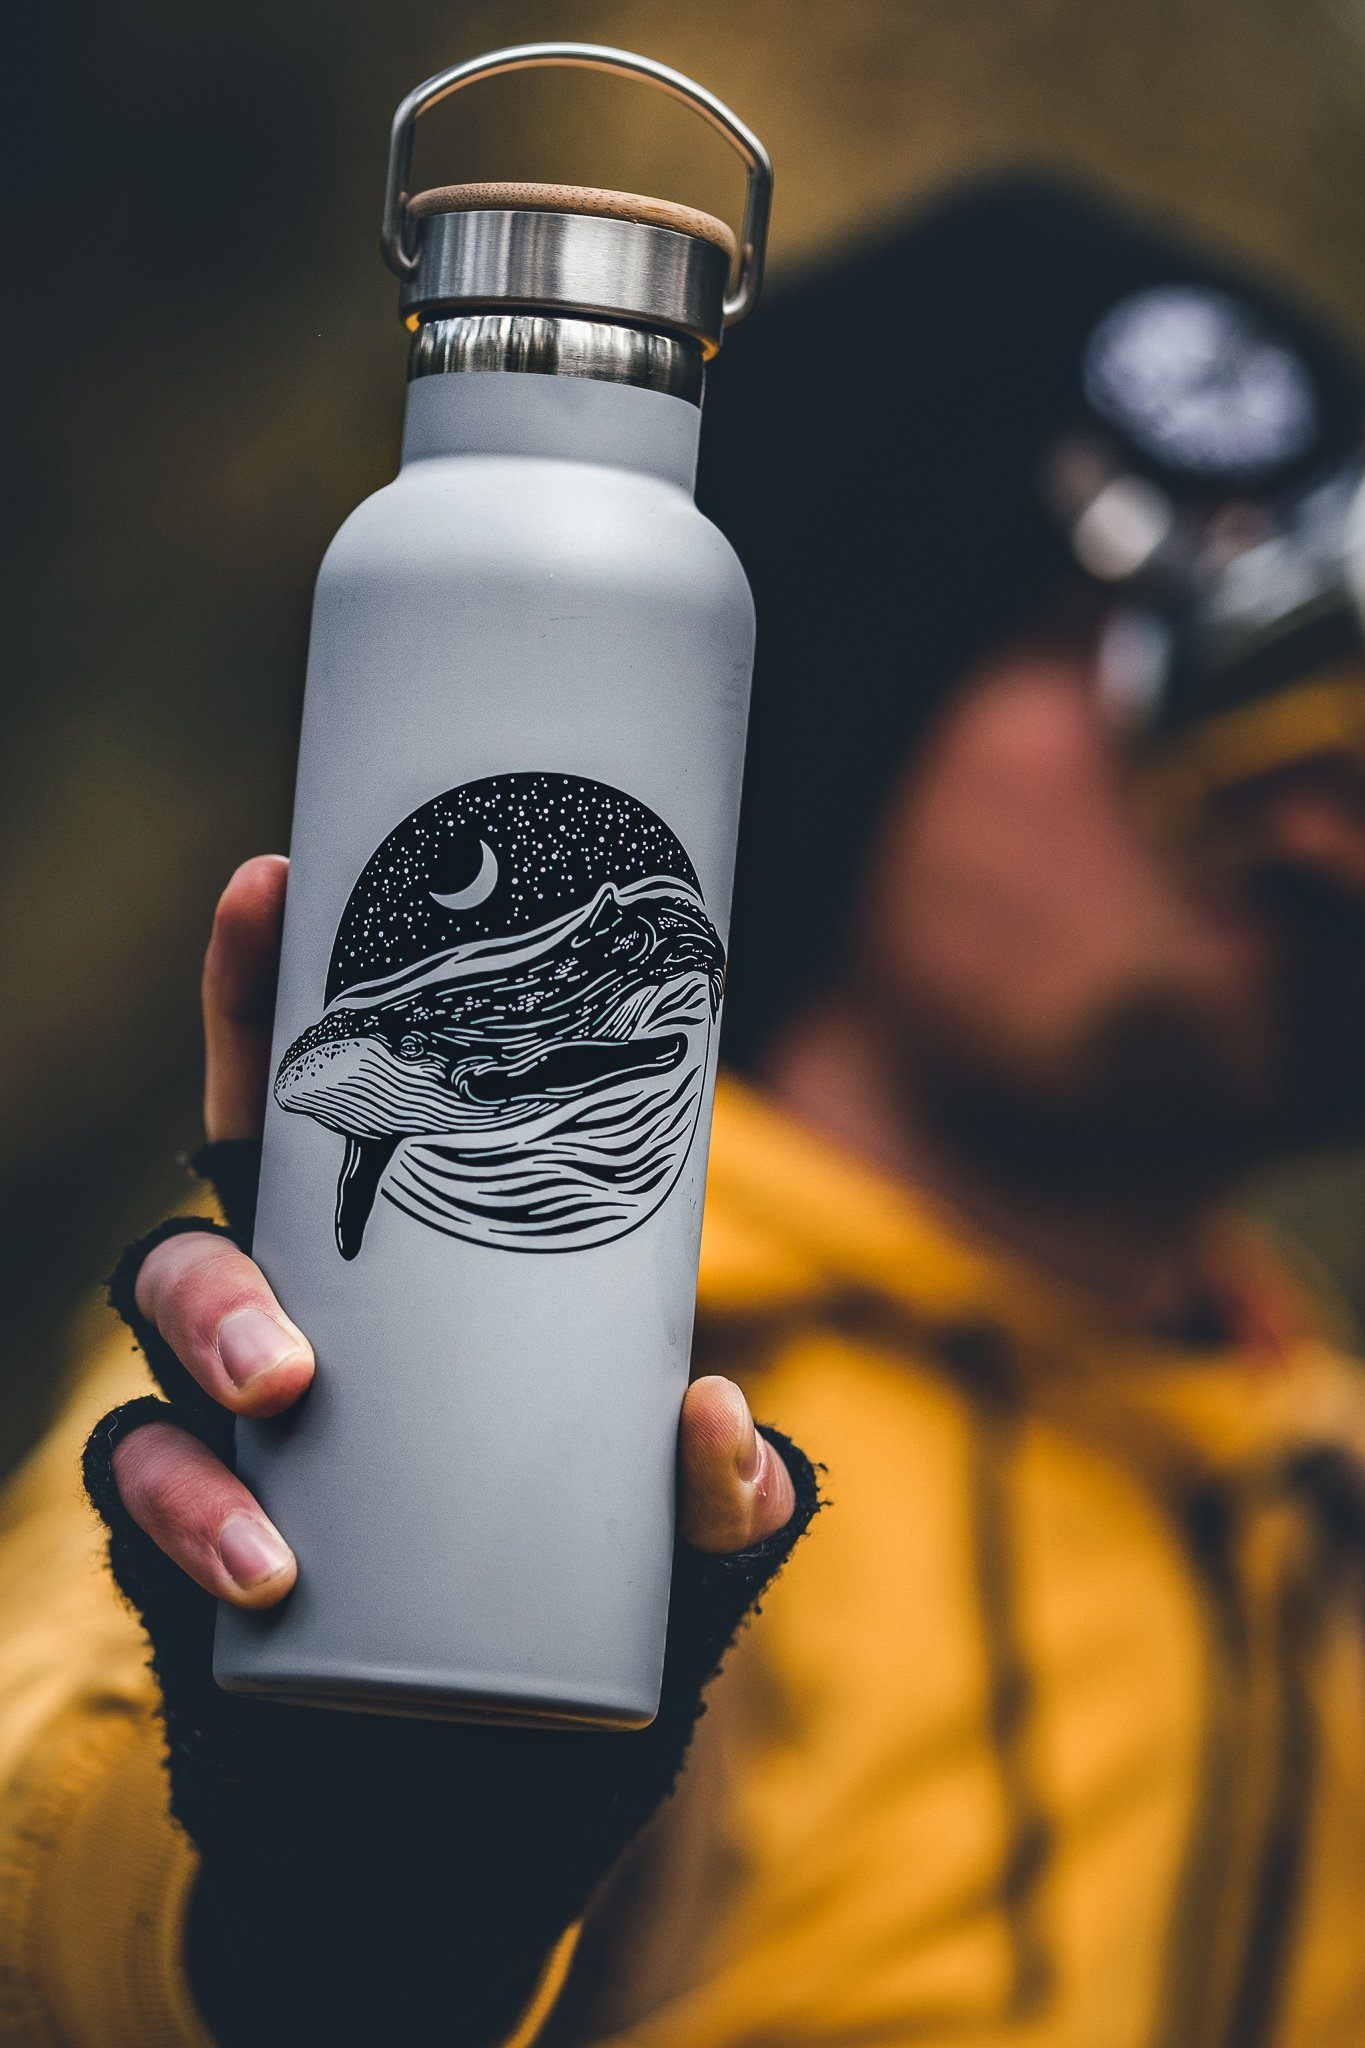 The Whale Water Bottle